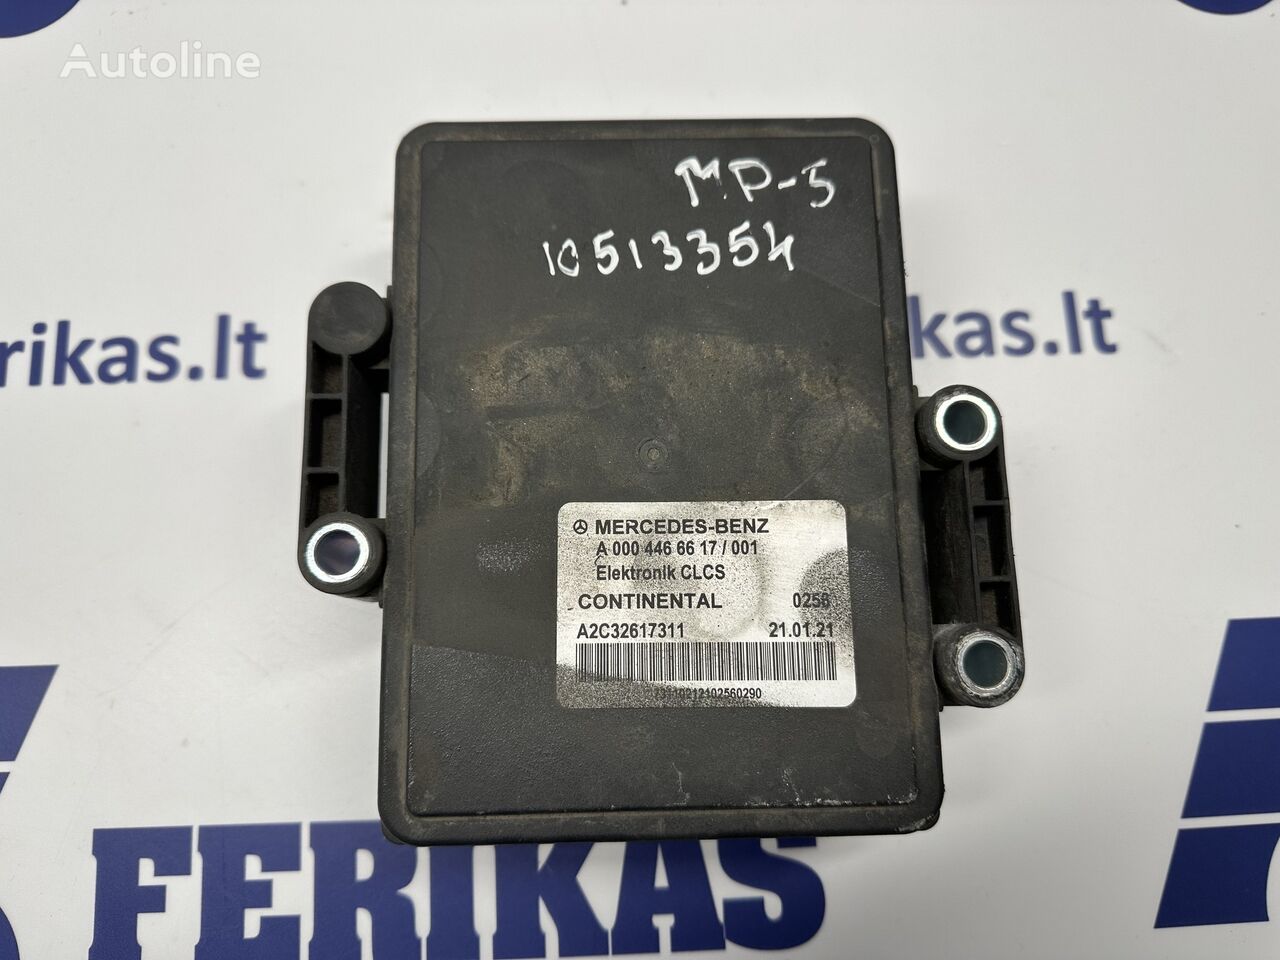 Continental control unit for Mercedes-Benz Actros MP5 truck tractor